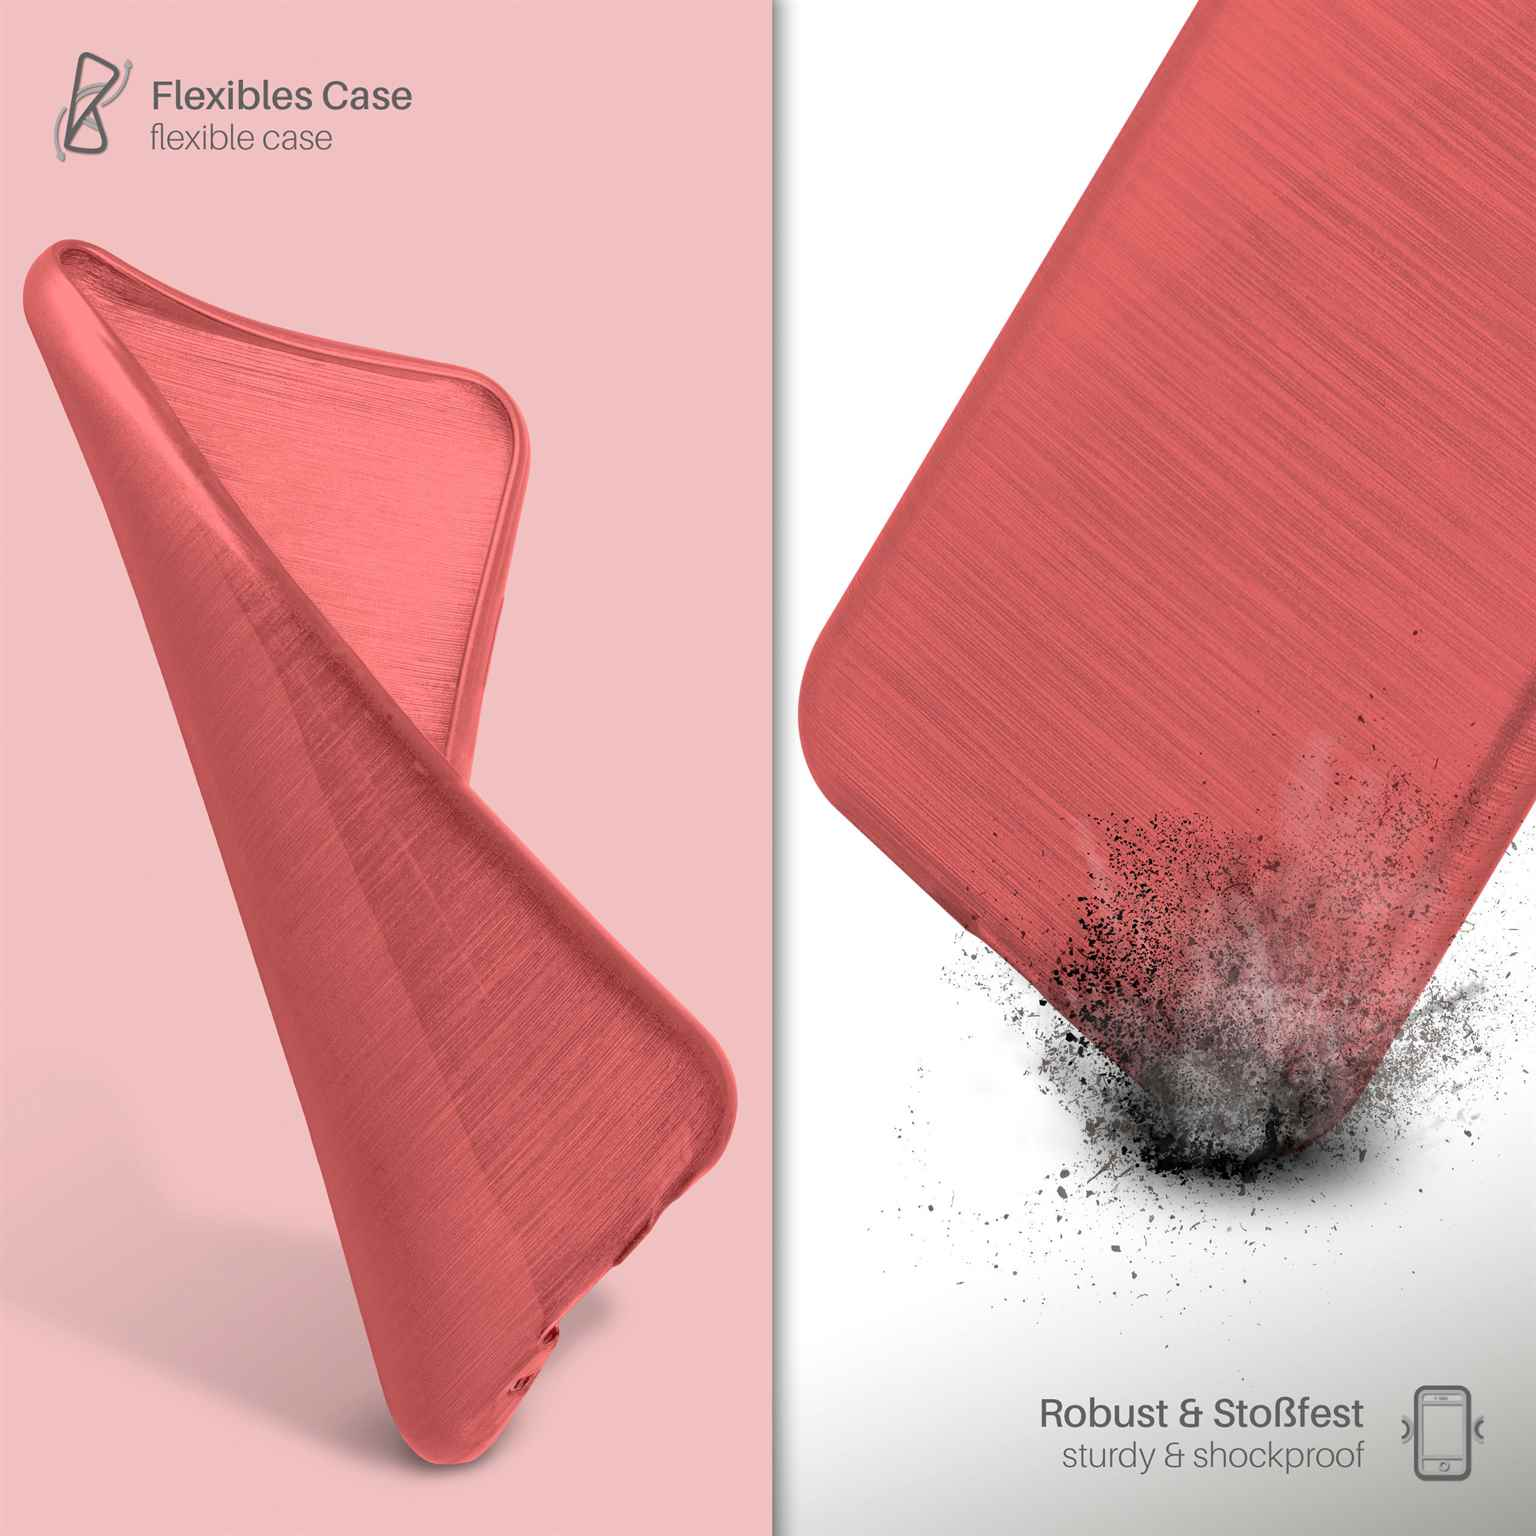 Coral-Red S4, Backcover, Samsung, Galaxy Brushed MOEX Case,